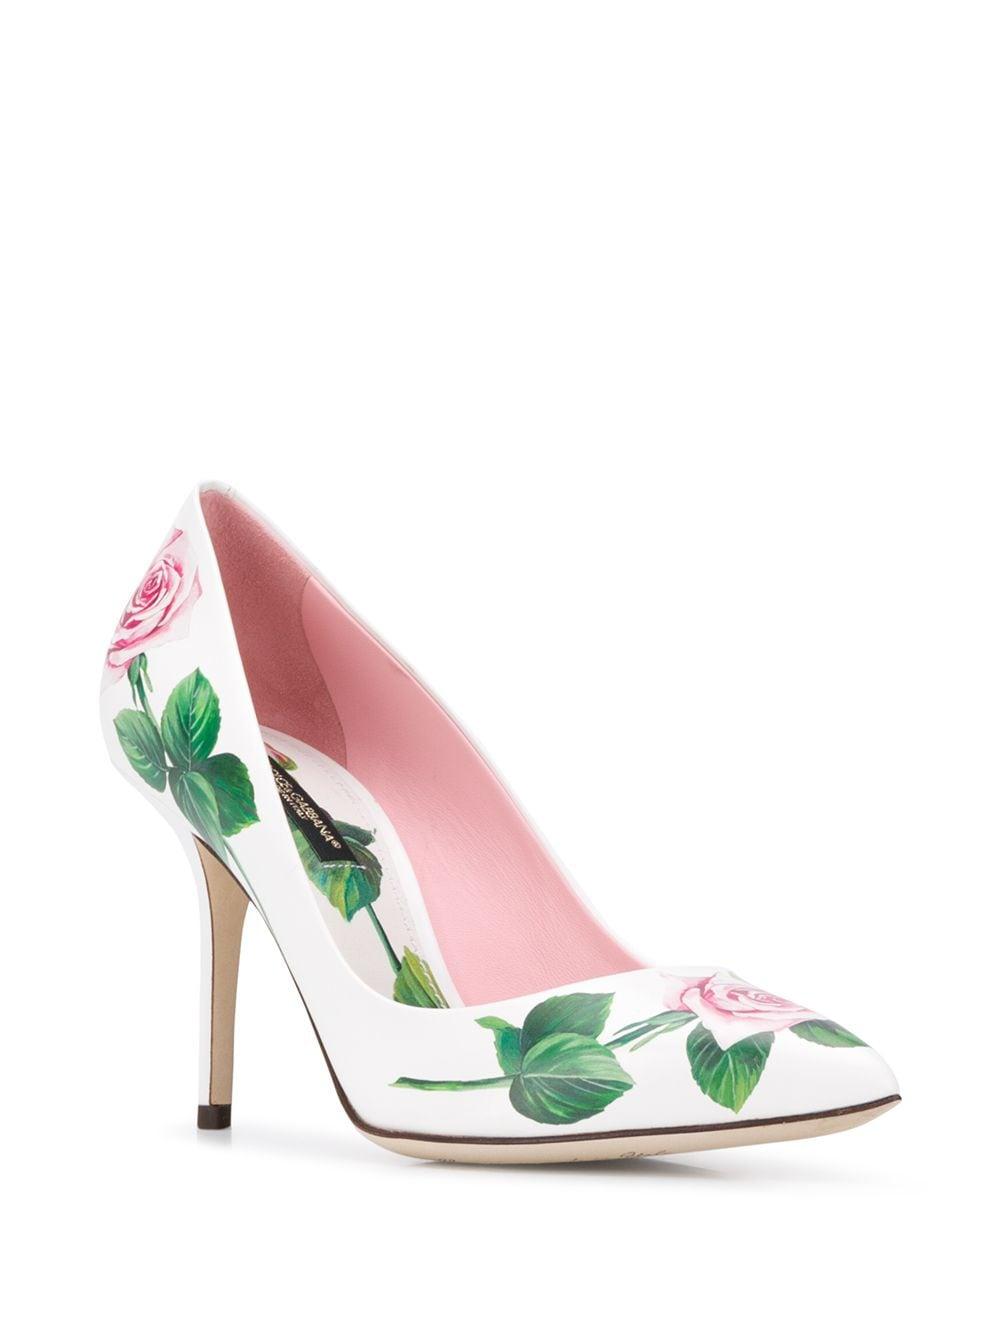 dolce and gabbana rose shoes